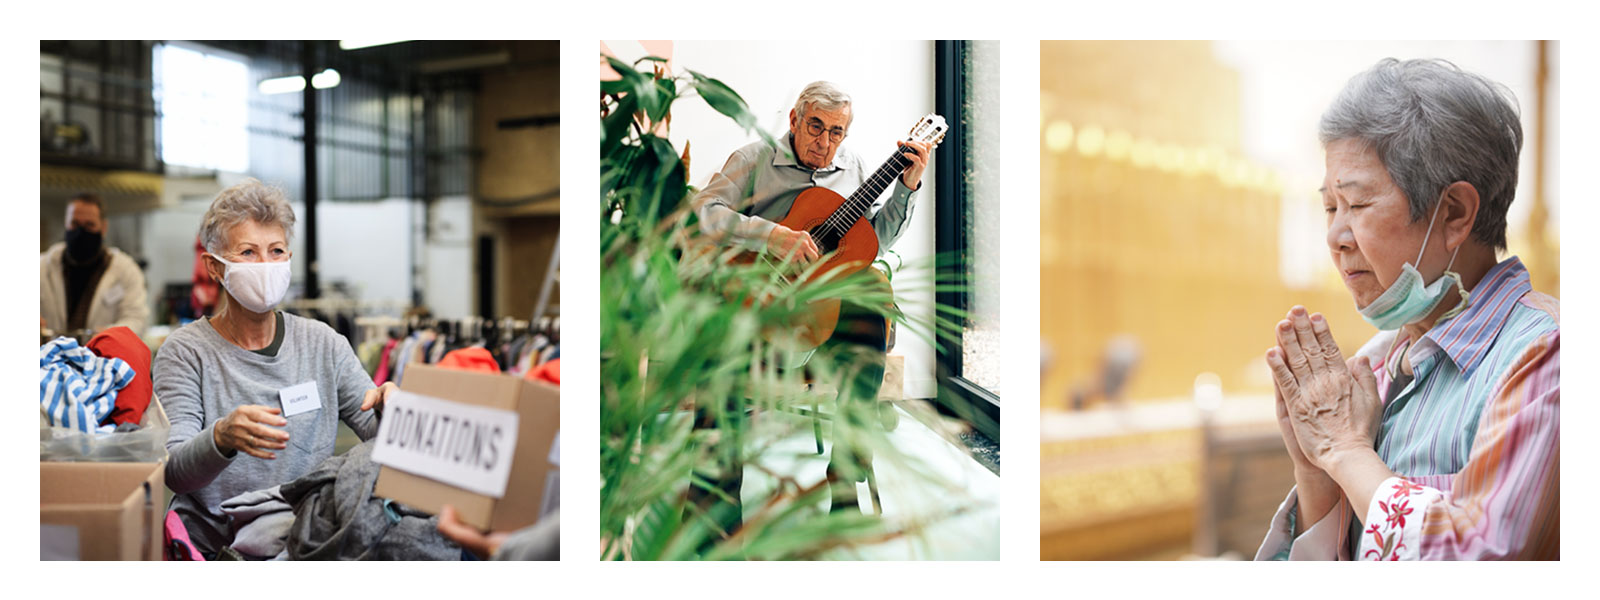 3 Images of Elders keeping active: volunteering, playing guitar, and praying at a temple.